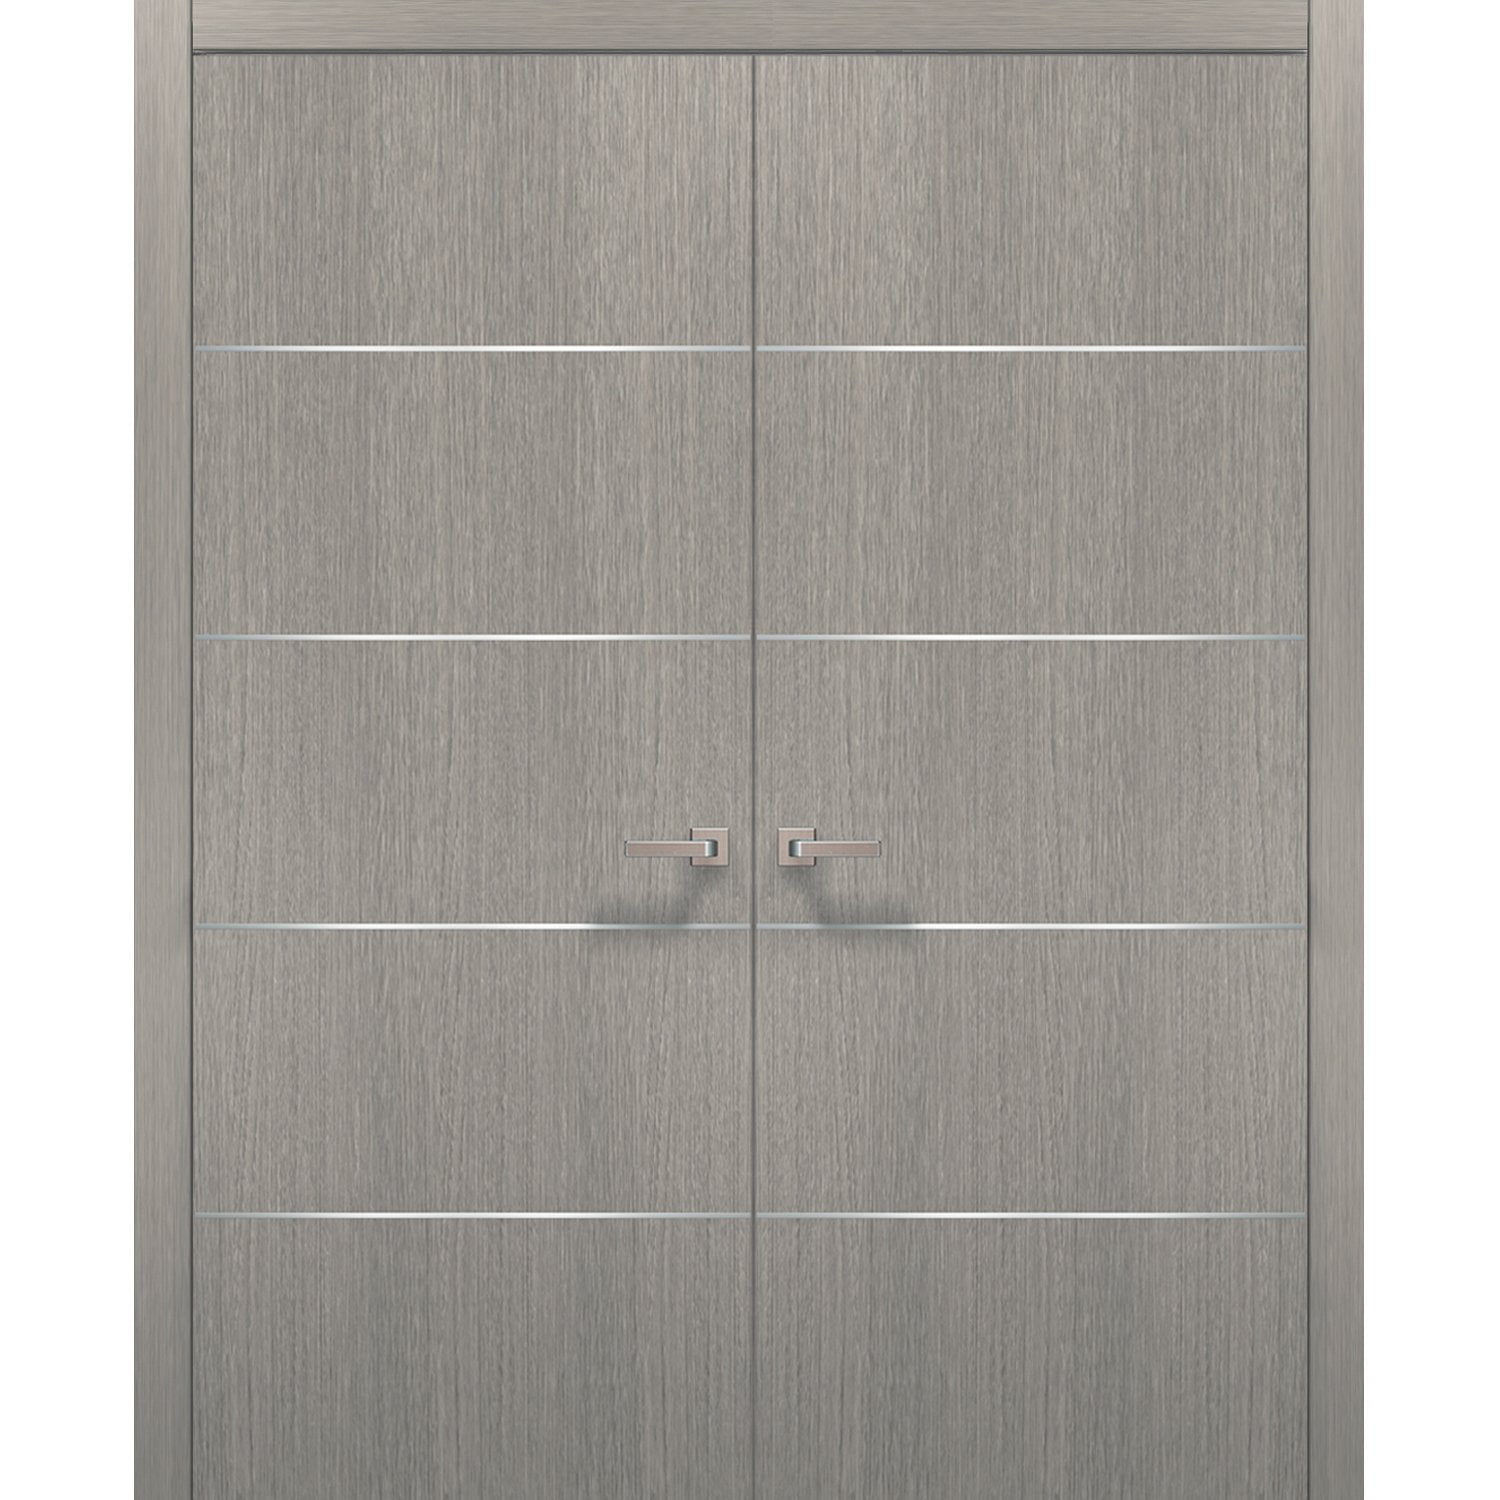 French Double Interior Doors 64 x 80 with Hardware - Walmart.com ...